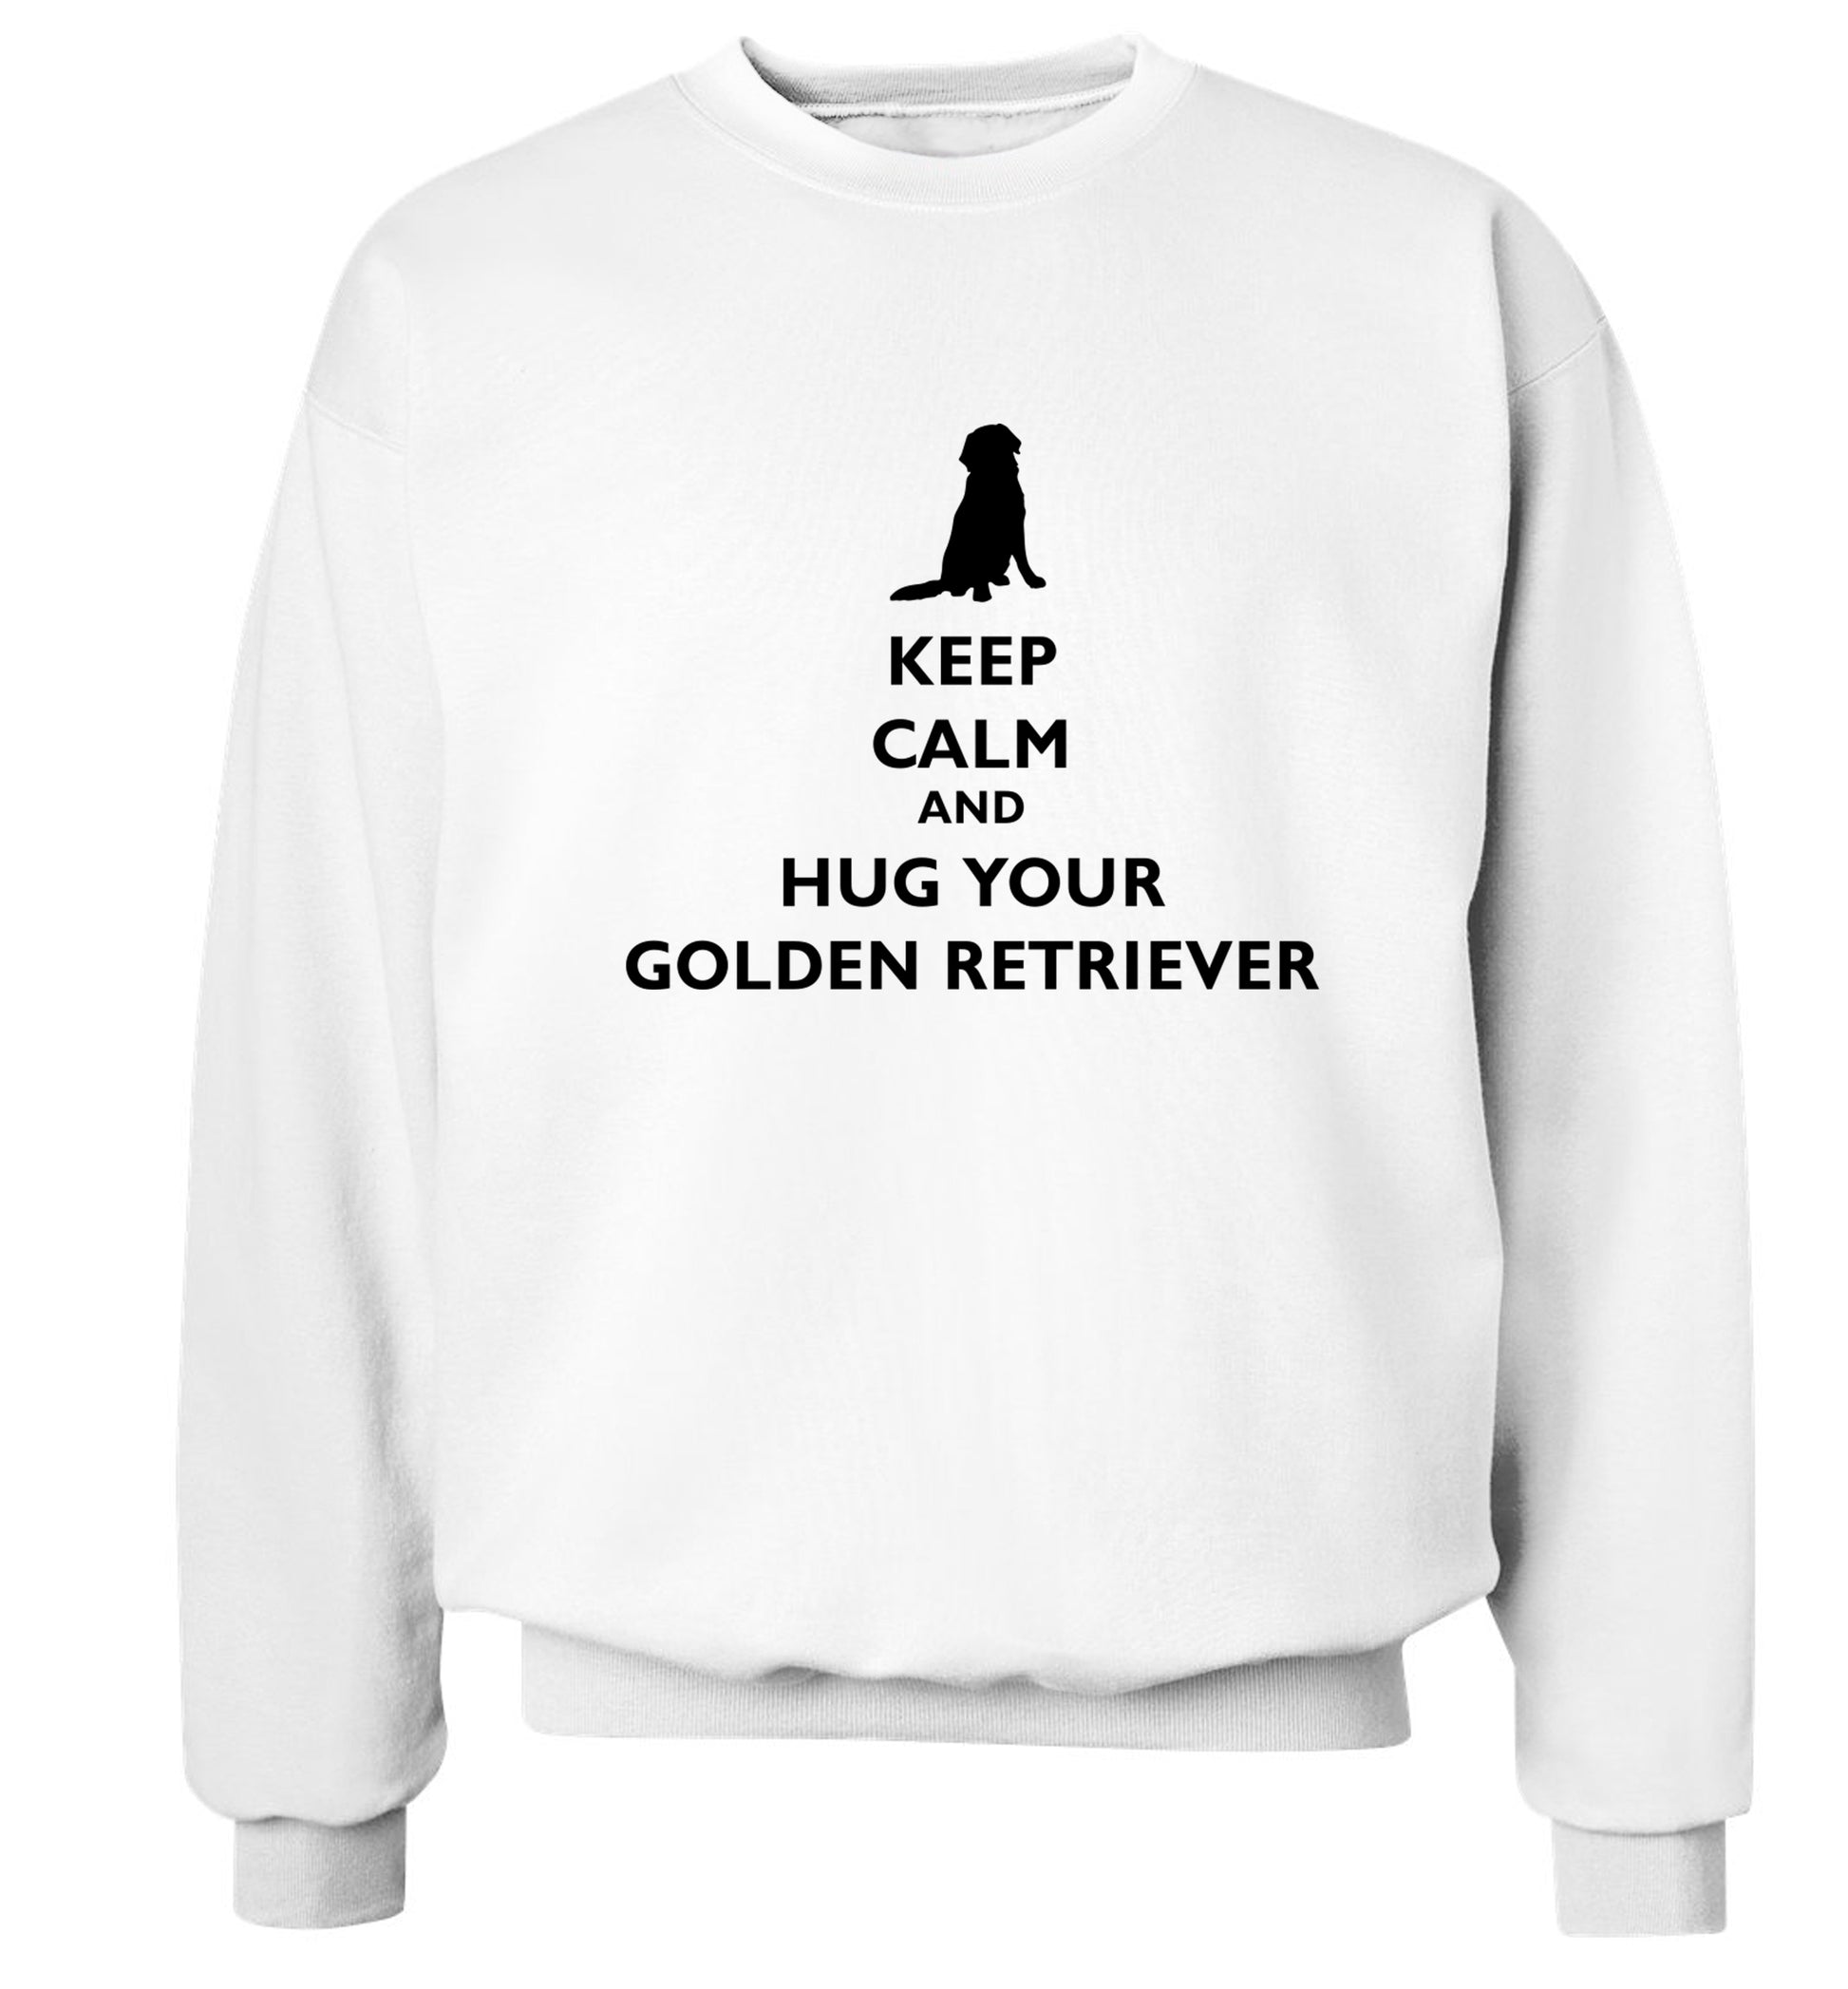 Keep calm and hug your golden retriever Adult's unisex white Sweater 2XL